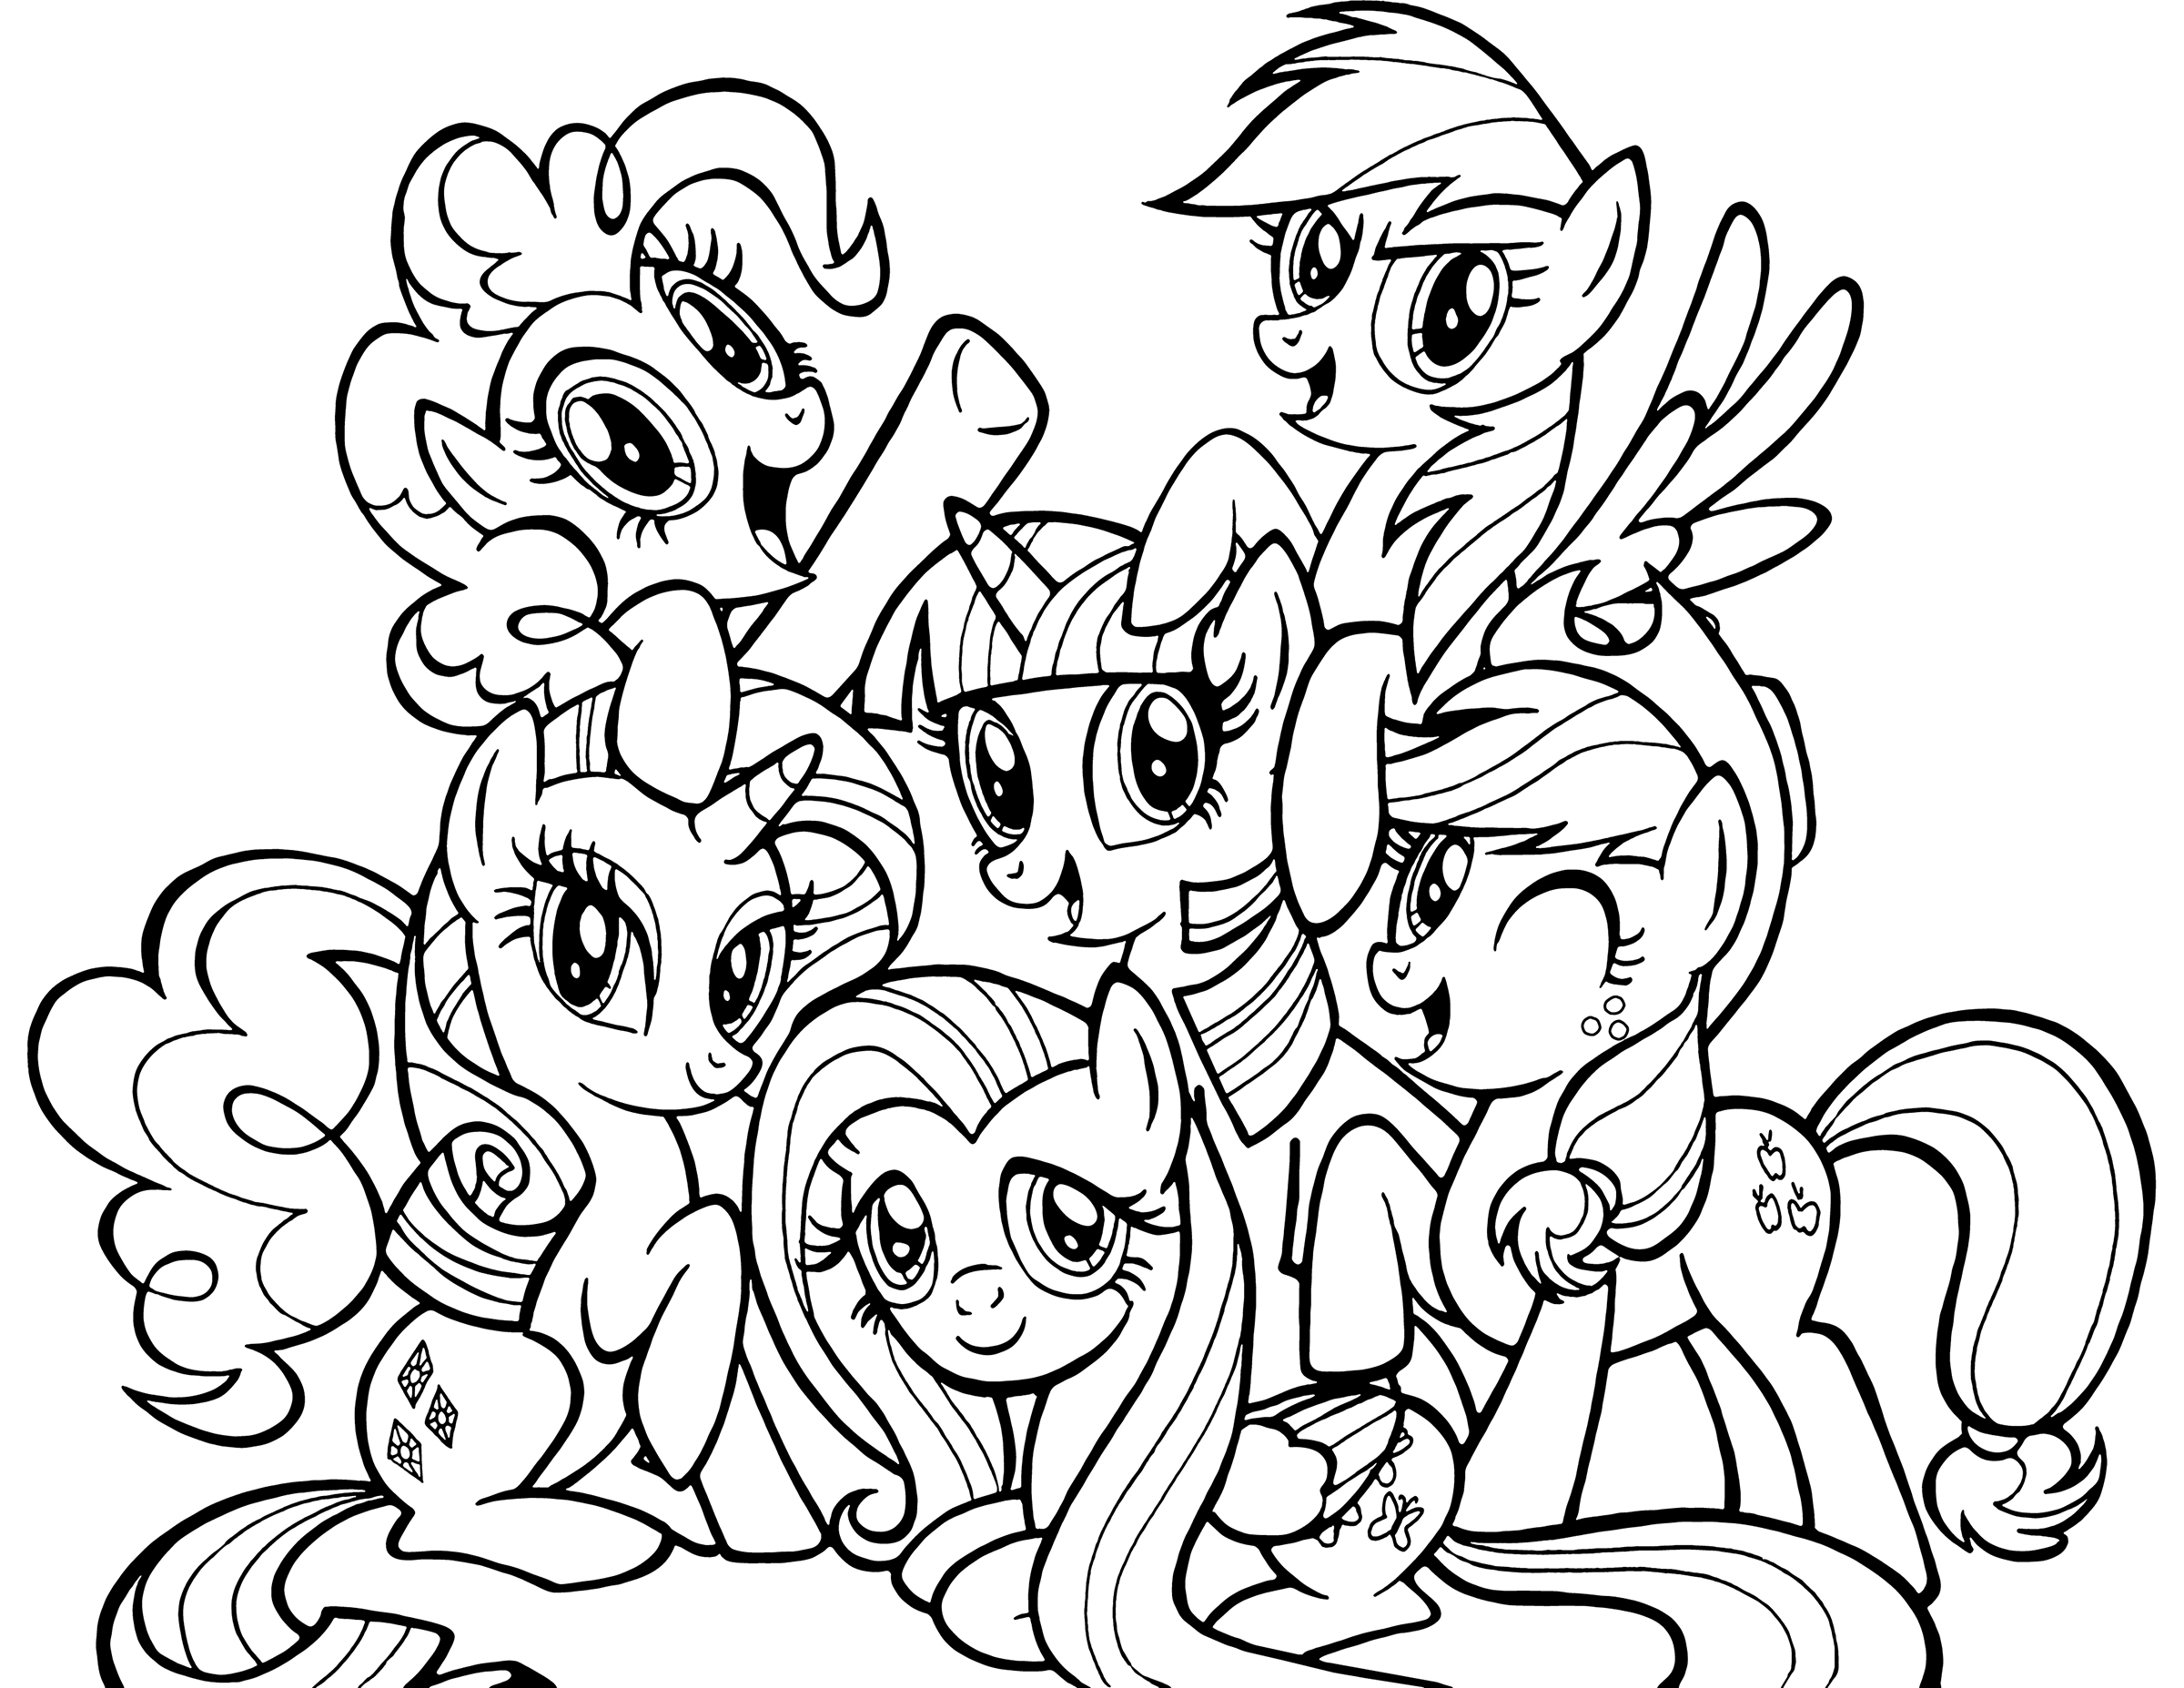 Ponies from Ponyville coloring pages, free printable ...